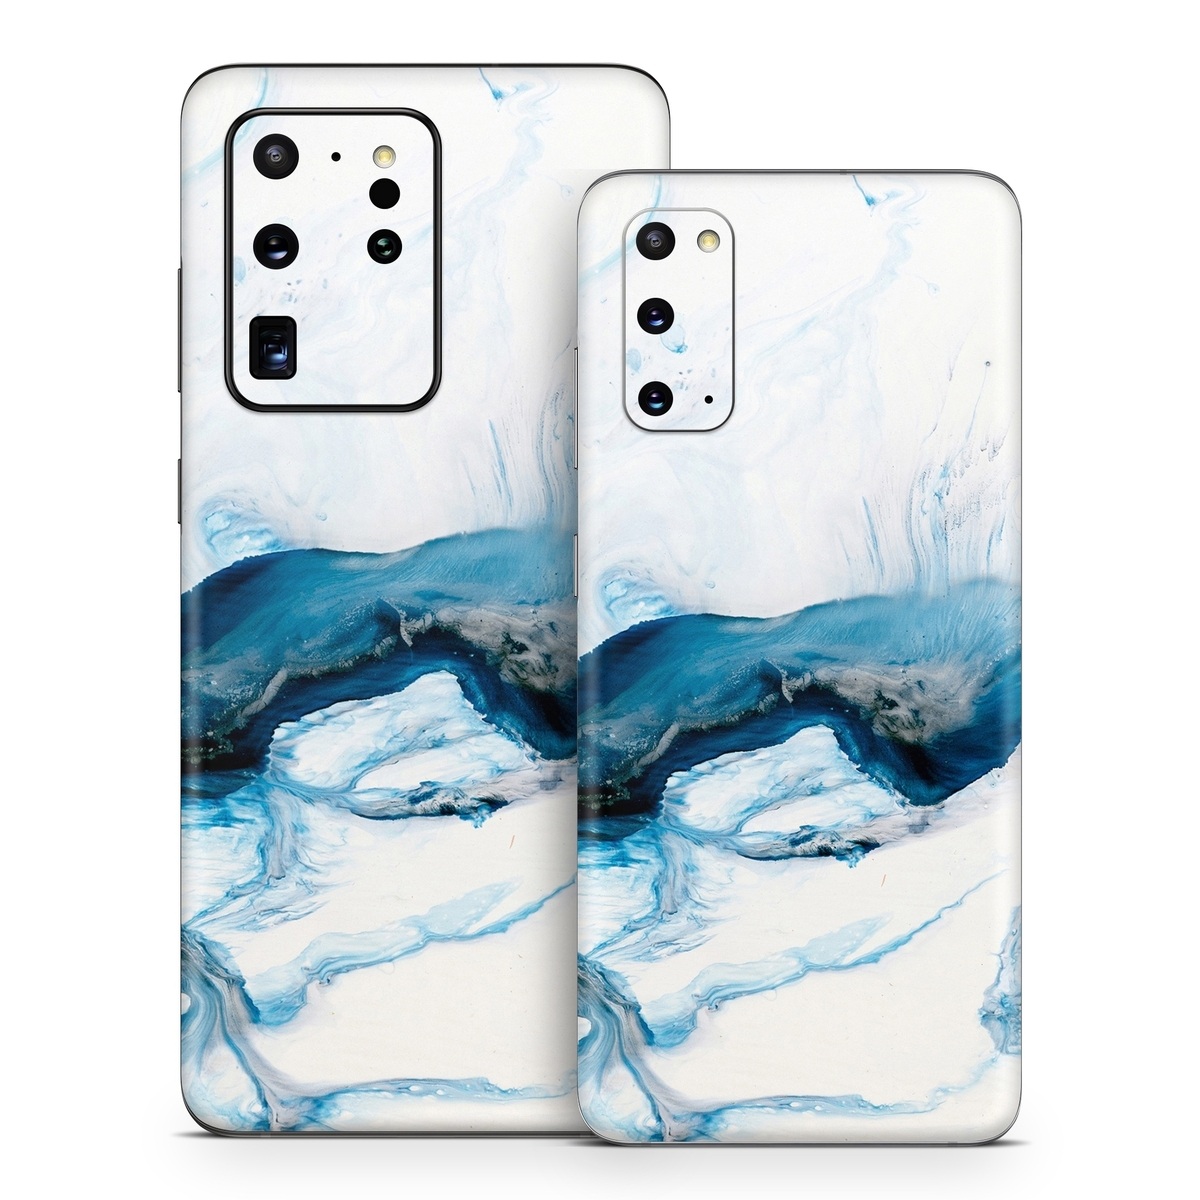 Samsung Galaxy S20 Series Skin design of Glacial landform, Blue, Water, Glacier, Sky, Arctic, Ice cap, Watercolor paint, Drawing, Art, with white, blue, black colors